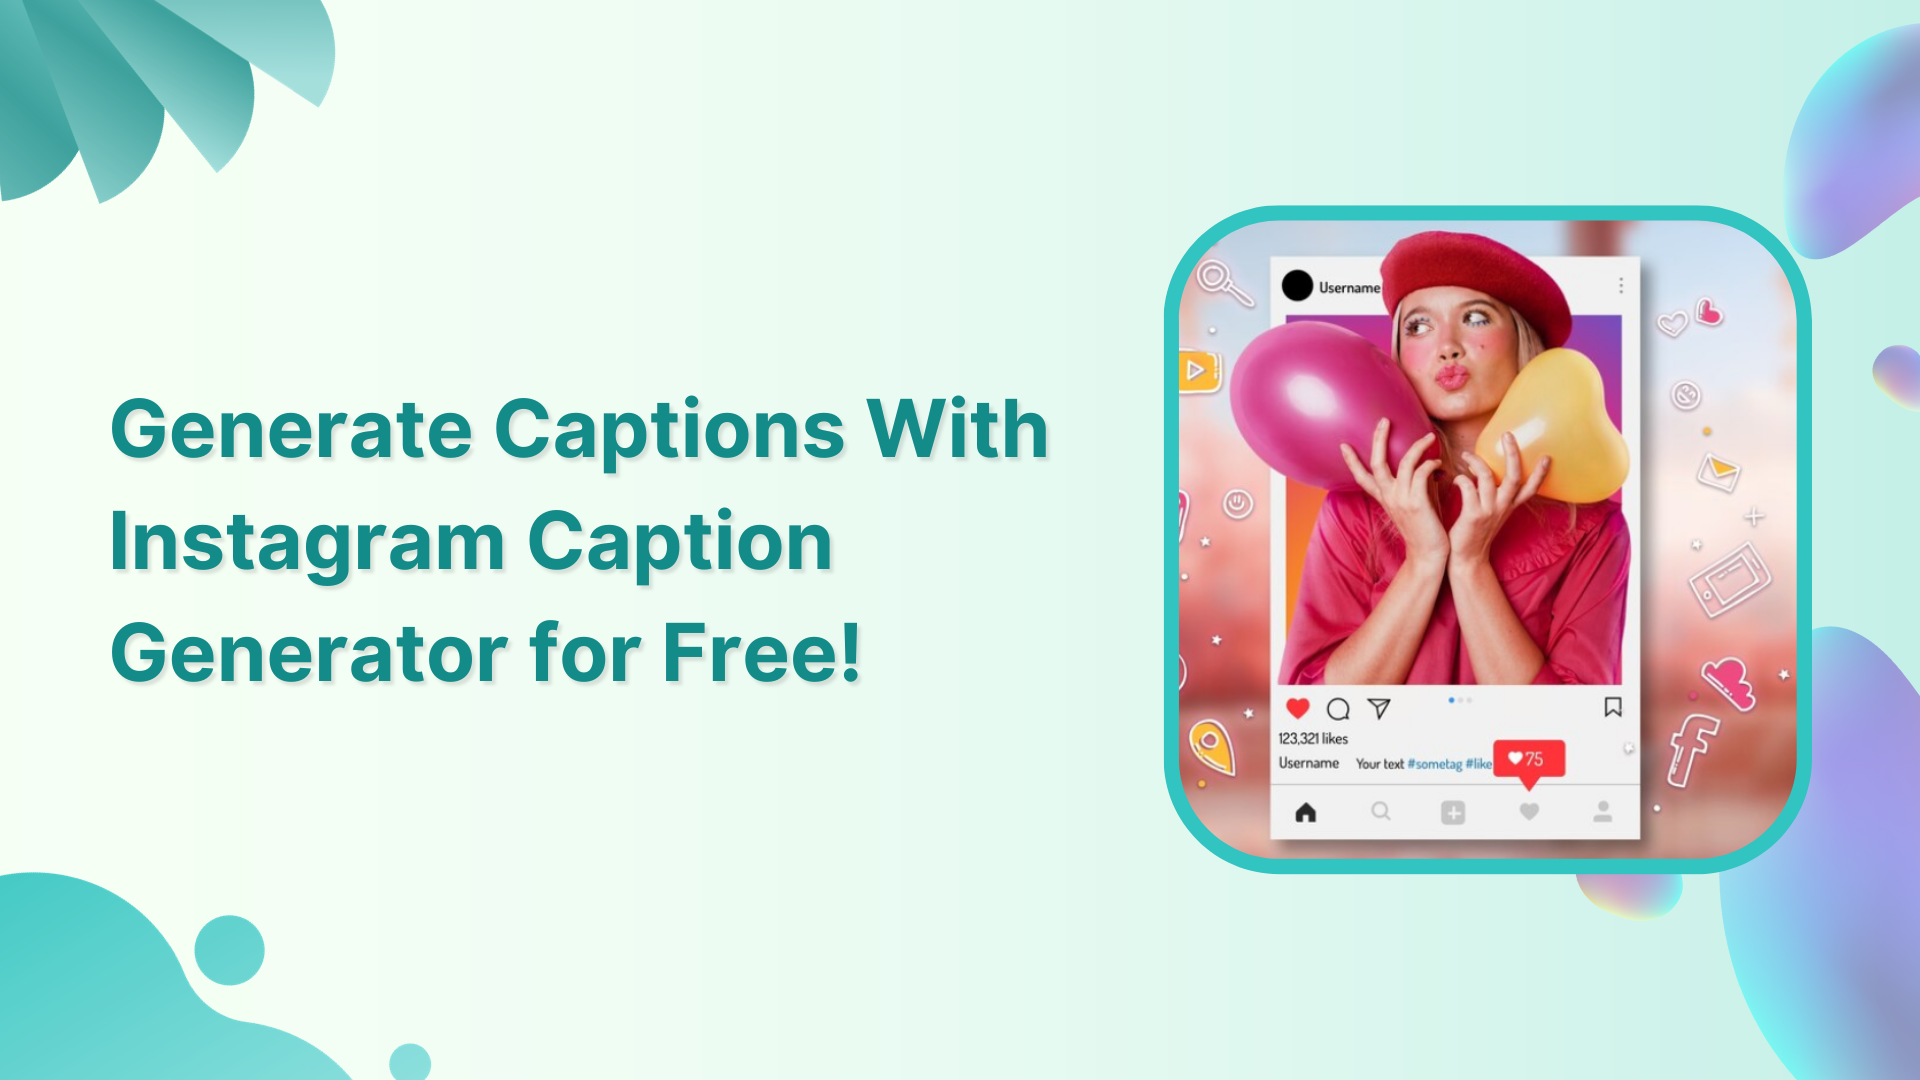 How to Generate Captions With Instagram Caption Generator for Free?